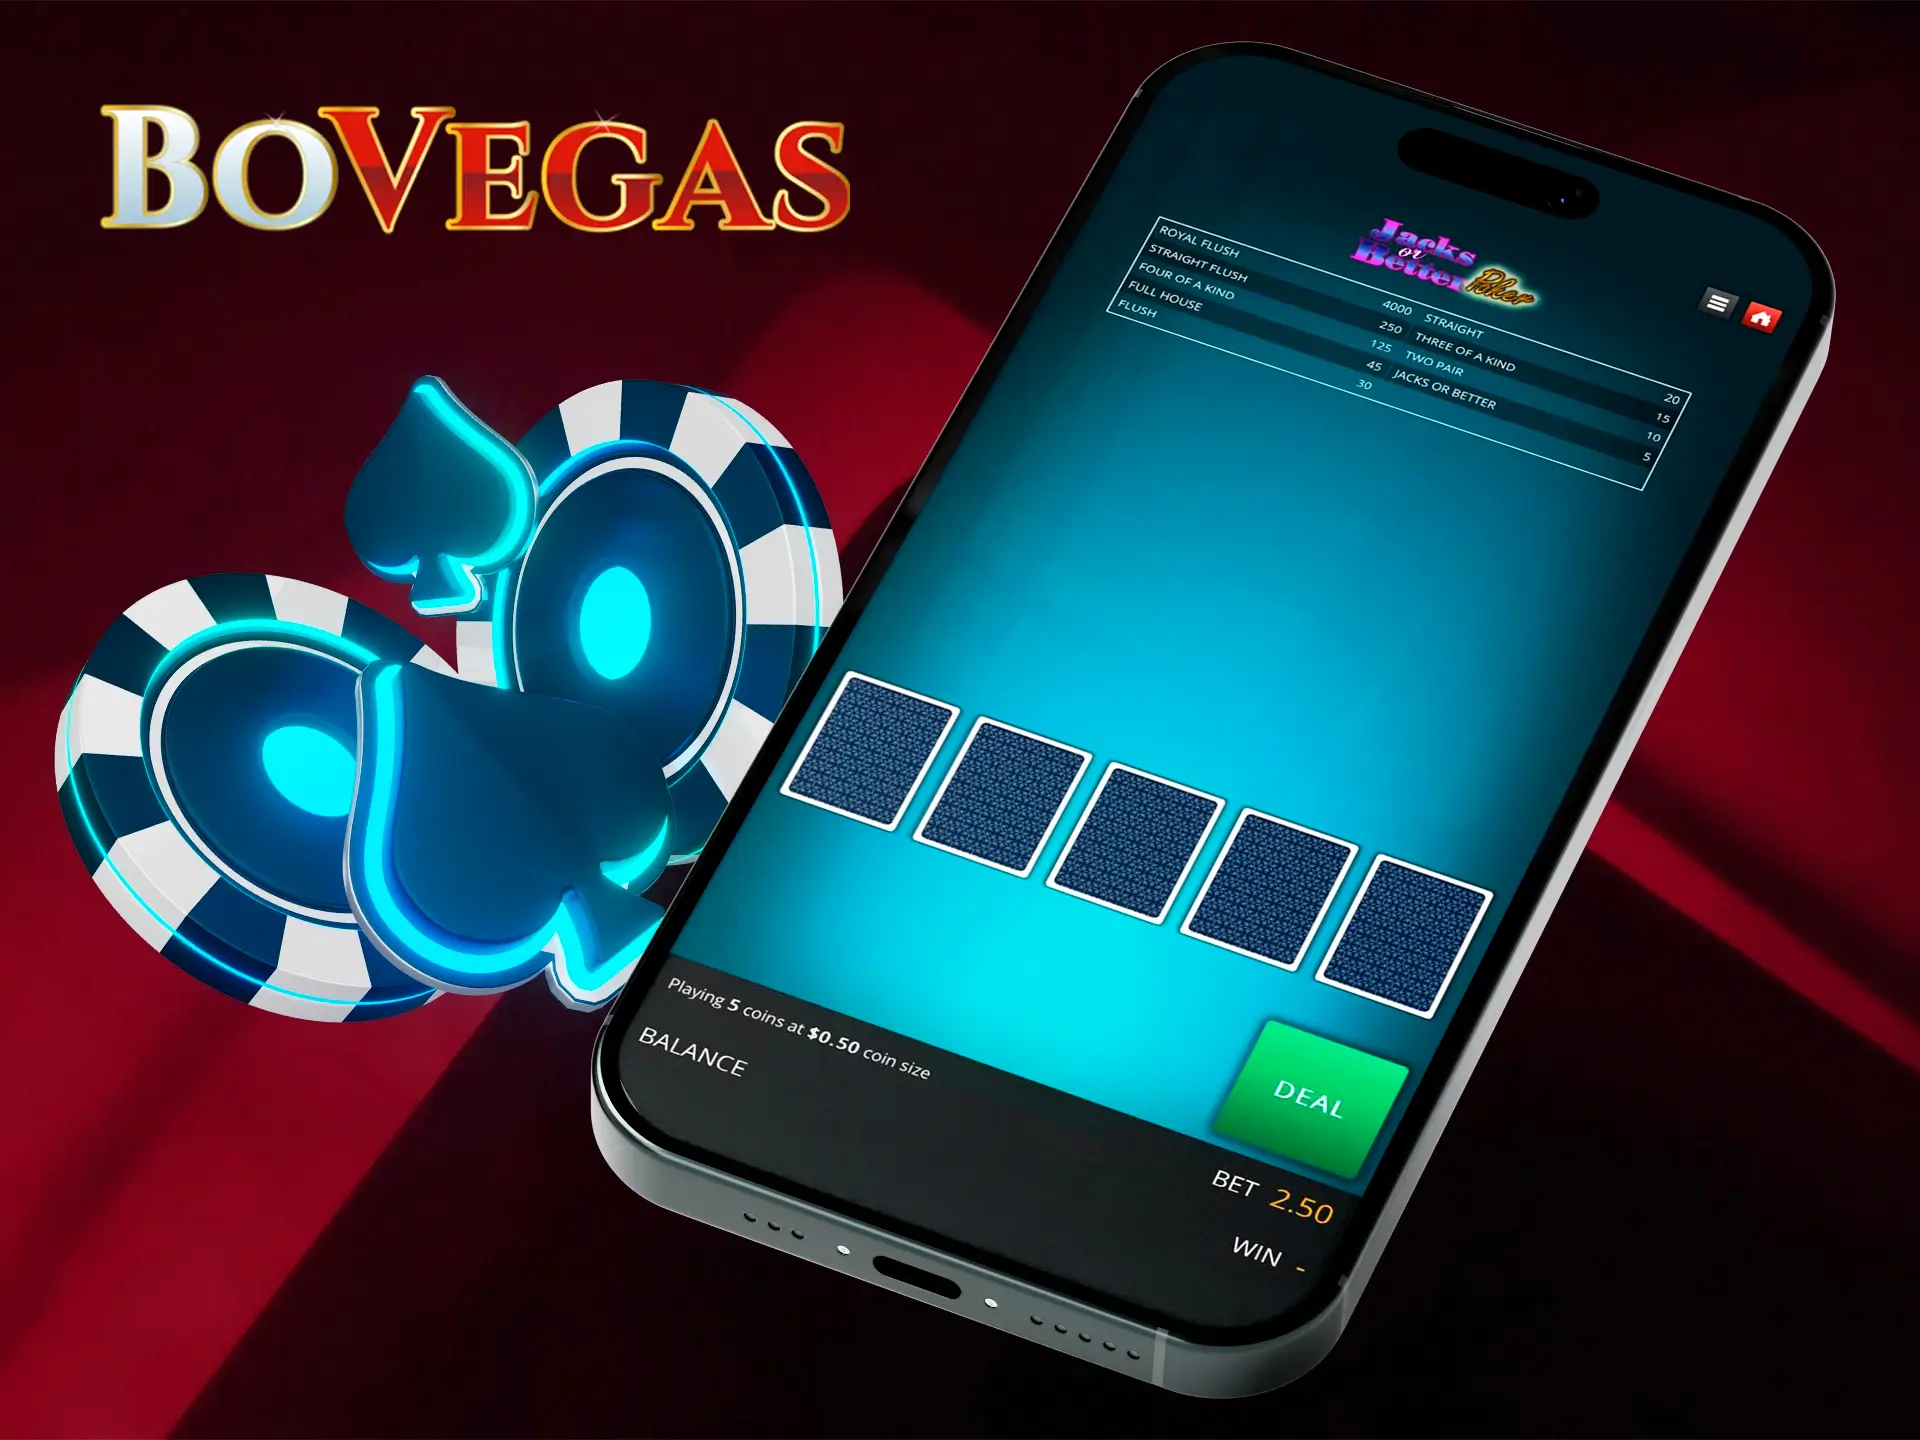 High quality graphics and instant access to poker are always available on the app from BoVegas Casino.